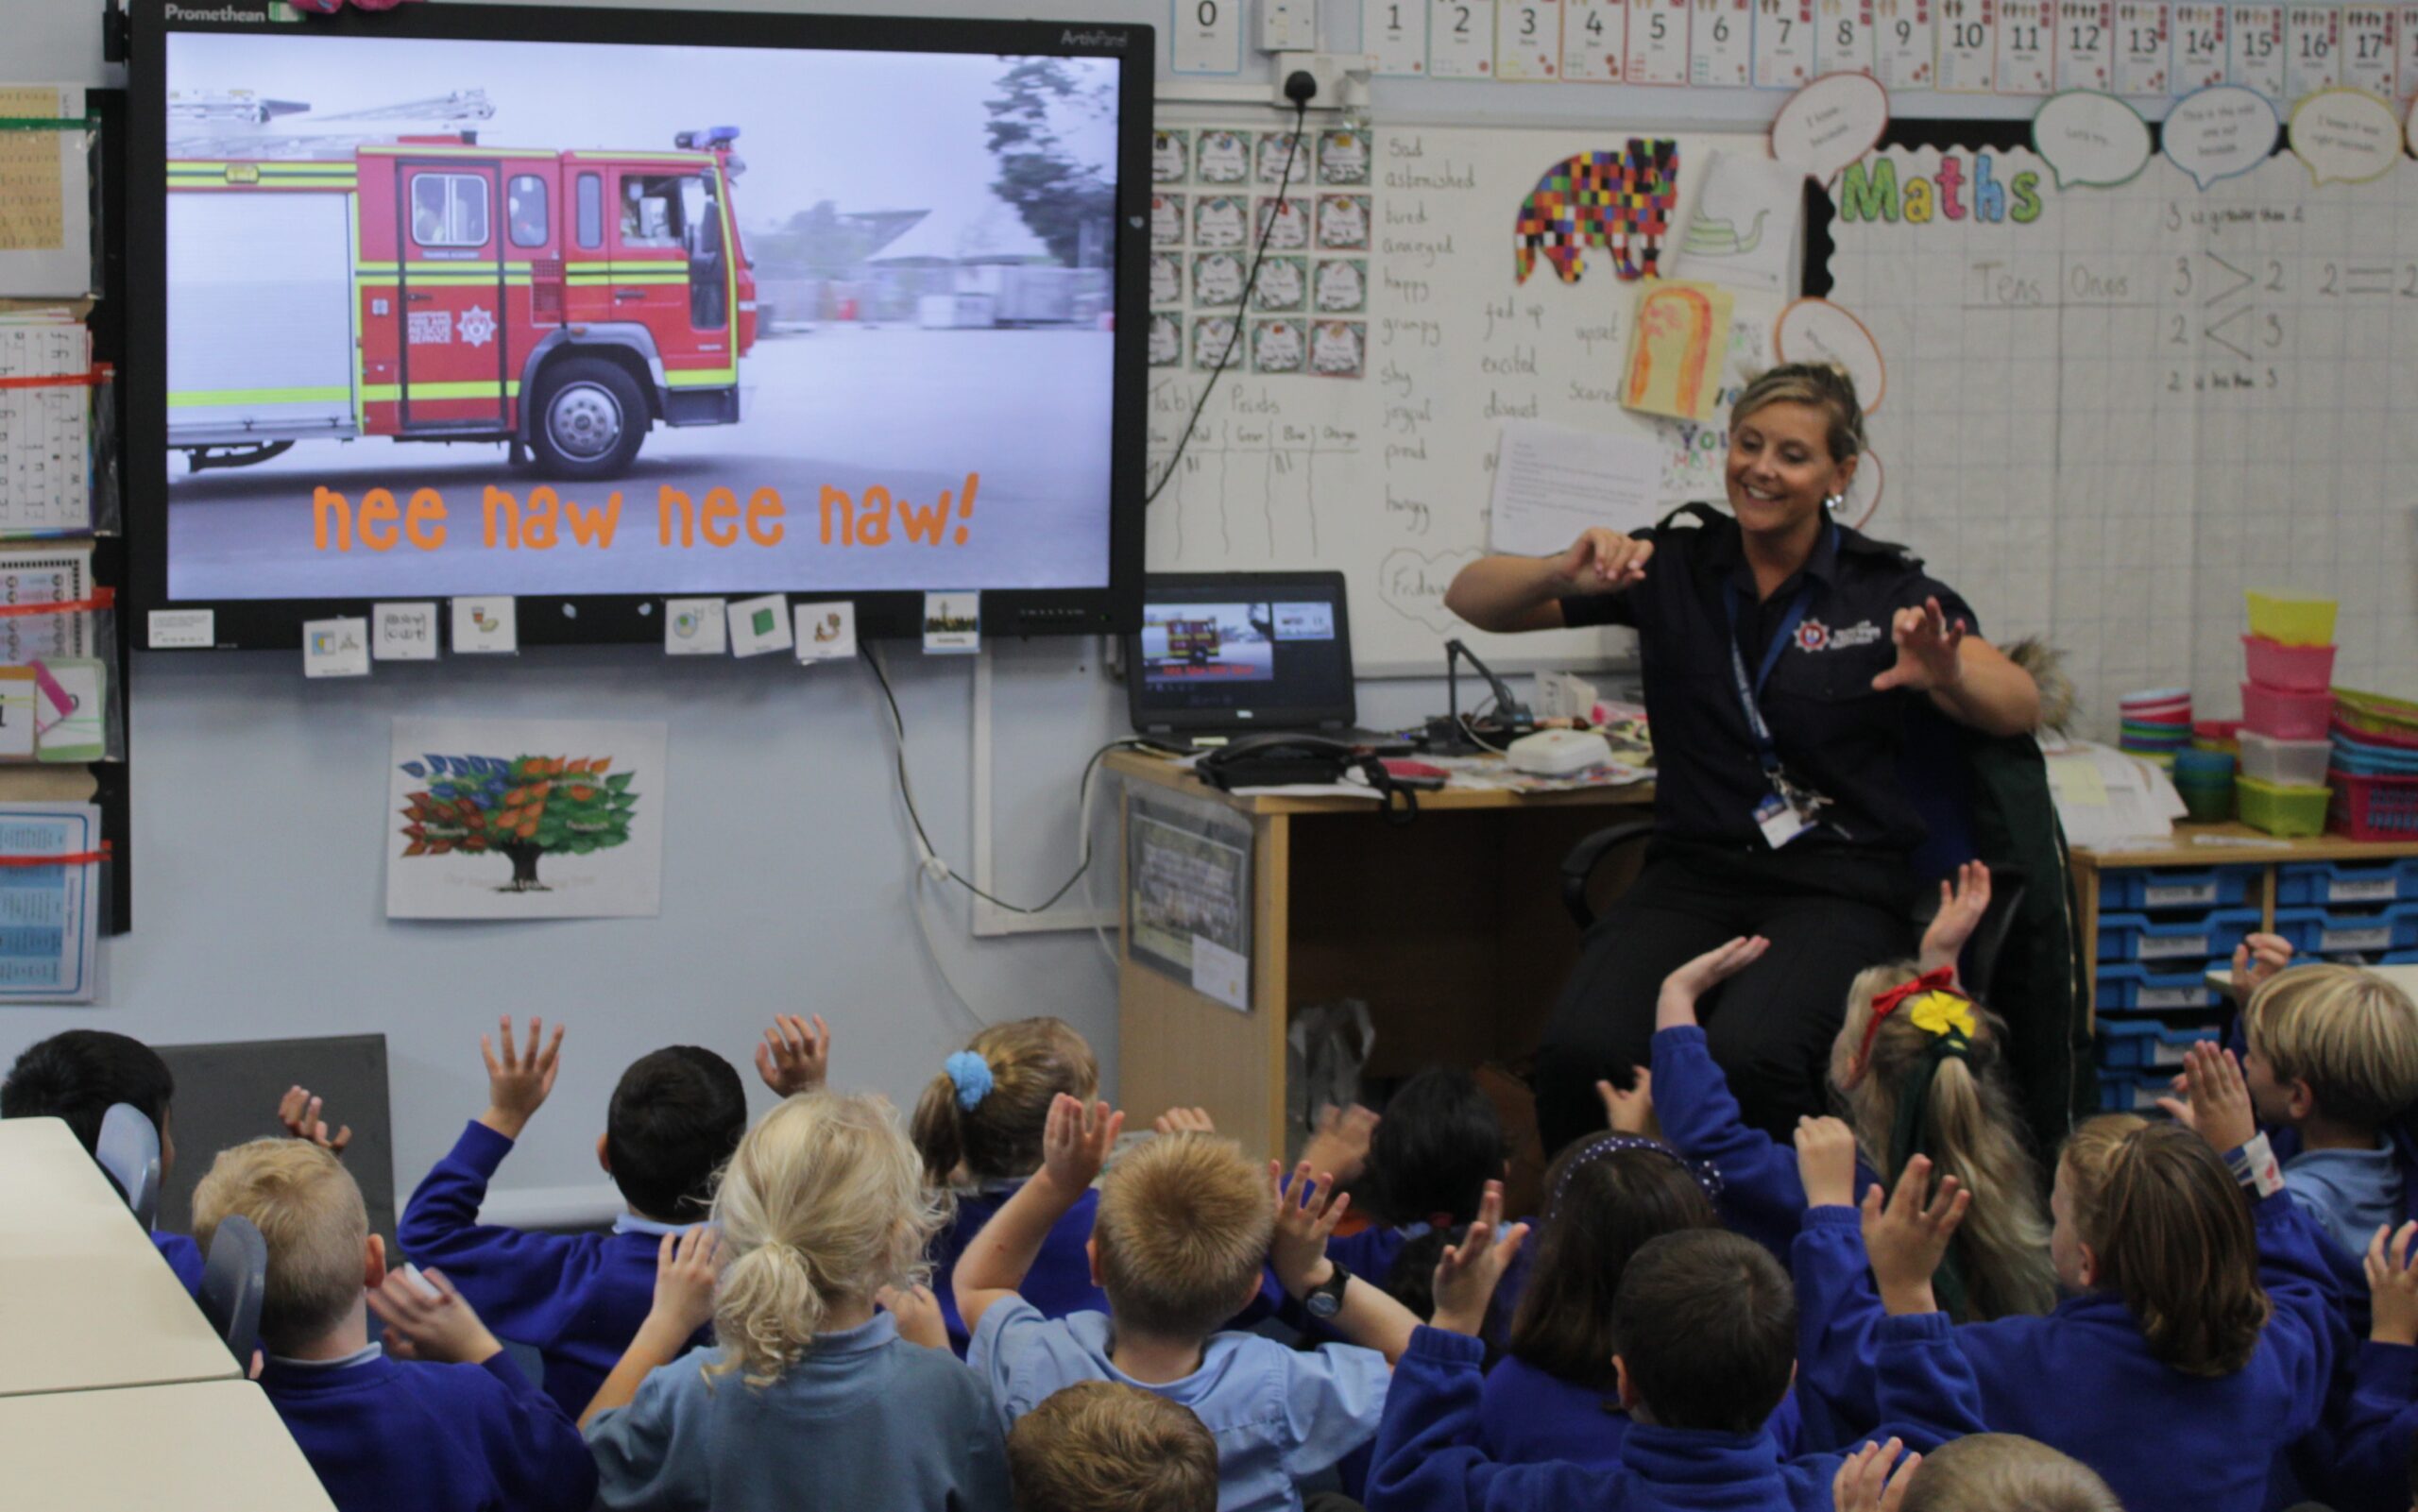 Fire Service Education team delivers safety advice